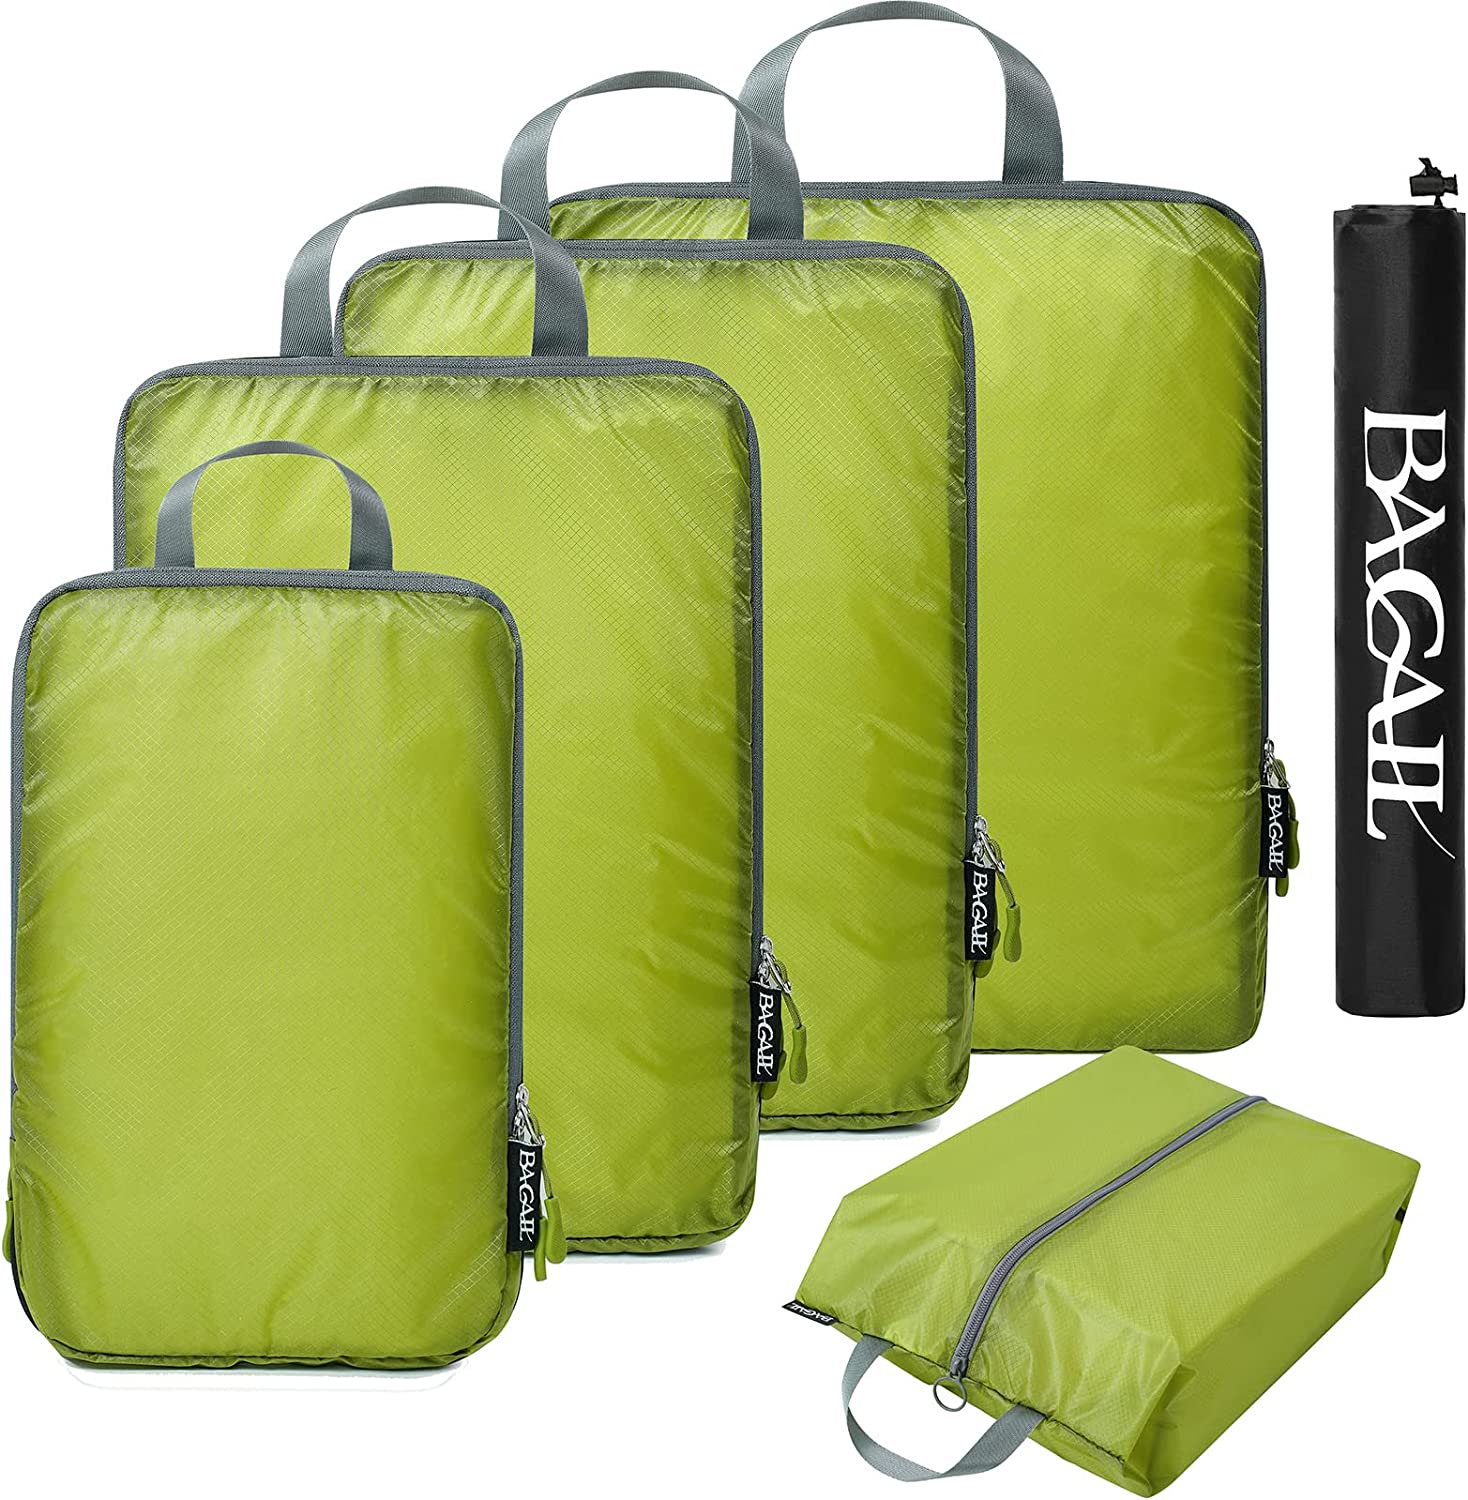 https://www.bagail.com/cdn/shop/files/bagail-6-set-30d-ultralight-compression-packing-cubes-packing-organizer-with-shoe-bag-for-travel-accessories-luggage-suitcase-backpack-bagail-storage-bag-38981770608876.jpg?v=1702889619